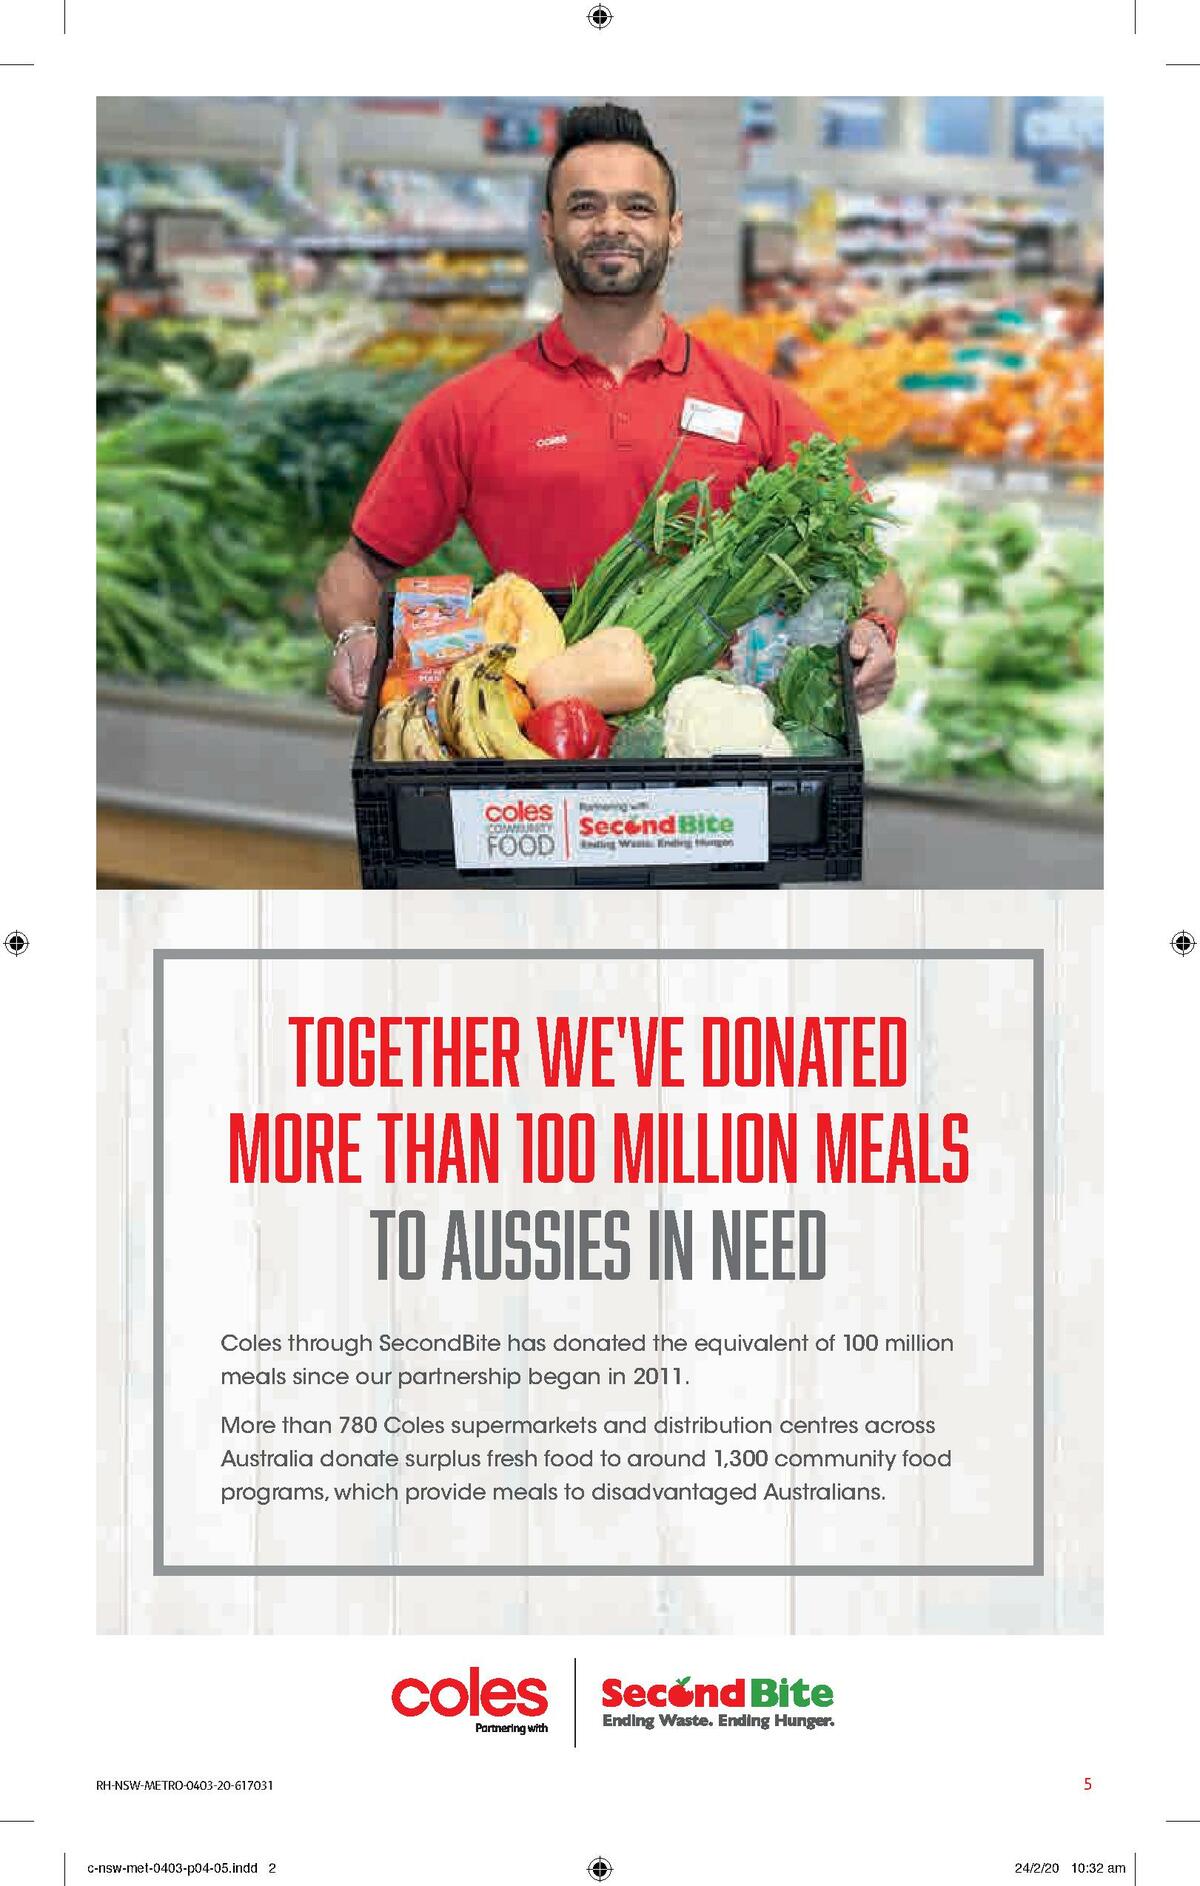 Coles Catalogues from 4 March